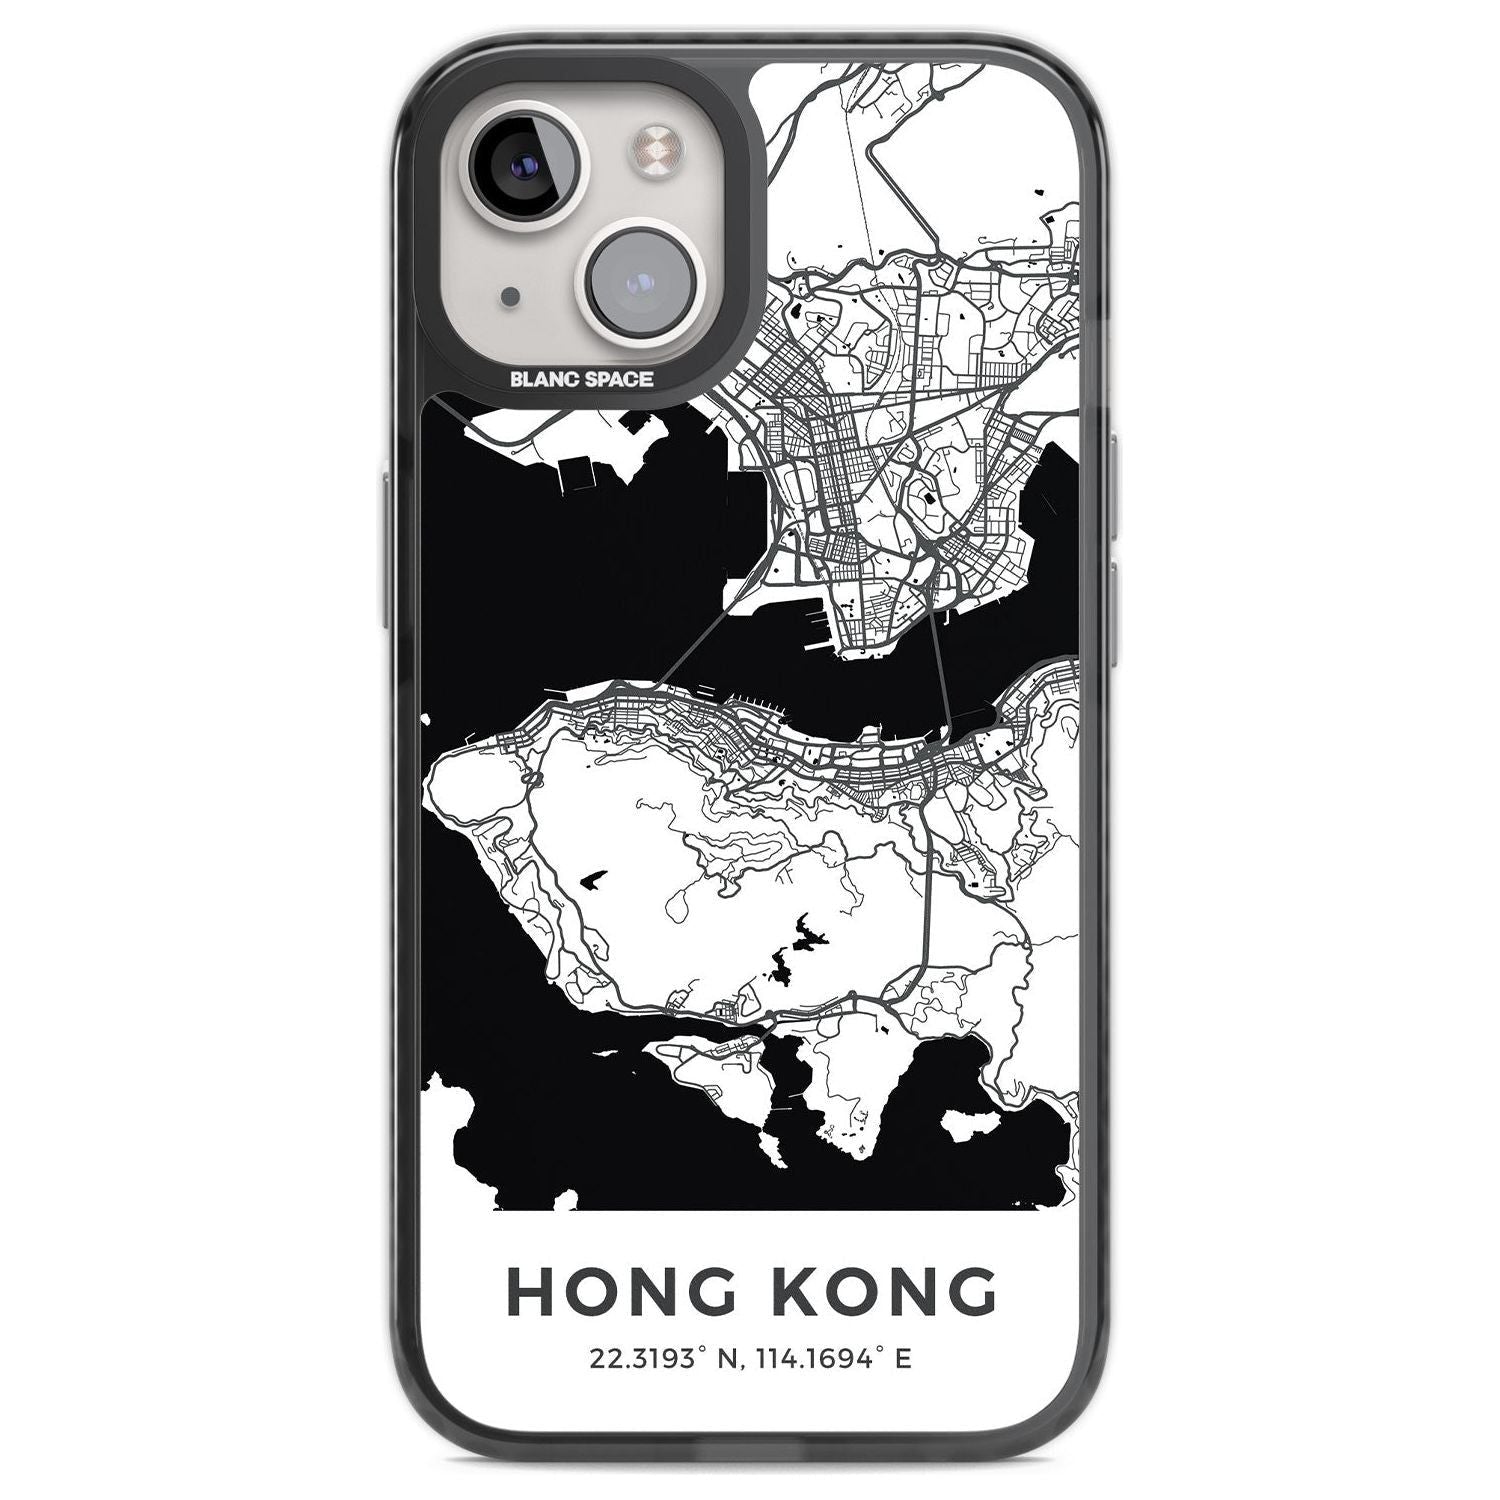 Map of Hong Kong Phone Case iPhone 12 / Black Impact Case,iPhone 13 / Black Impact Case,iPhone 12 Pro / Black Impact Case,iPhone 14 / Black Impact Case,iPhone 15 Plus / Black Impact Case,iPhone 15 / Black Impact Case Blanc Space